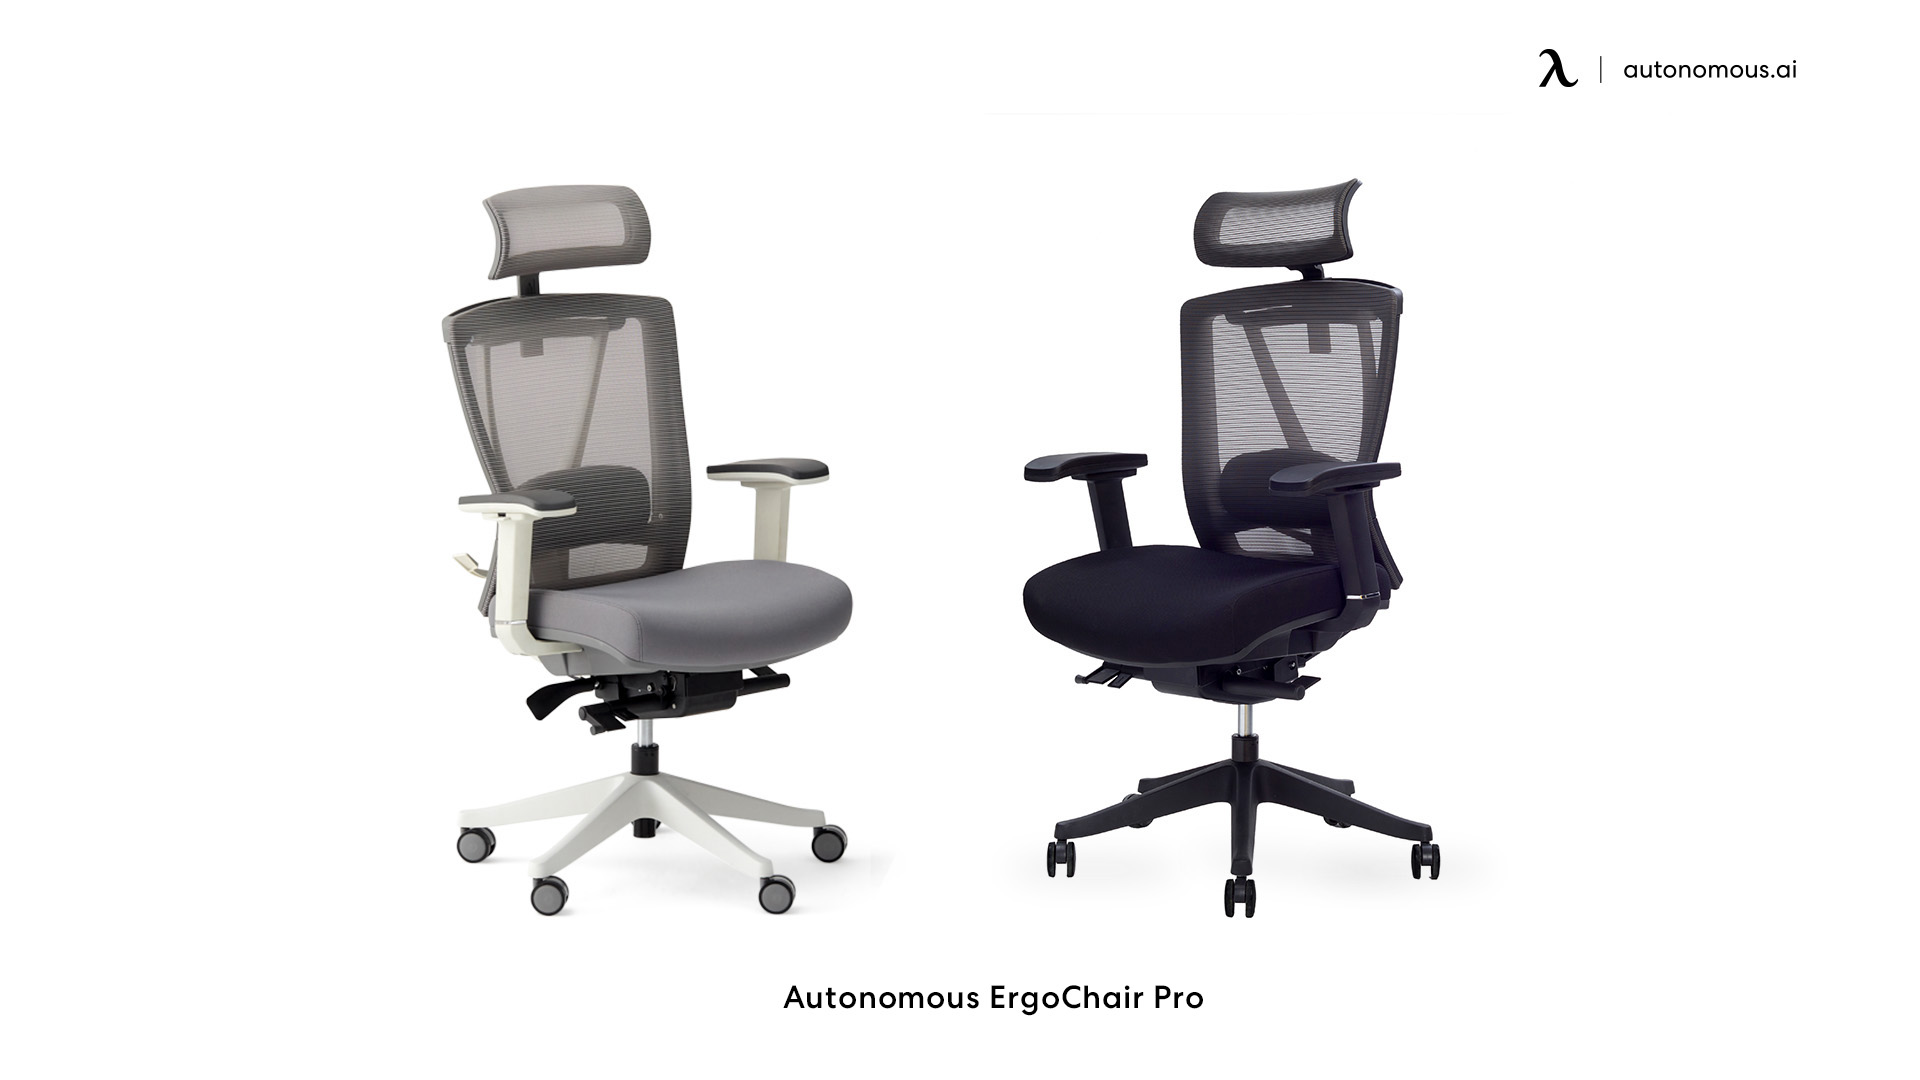 ErgoChair Pro office chairs with arms